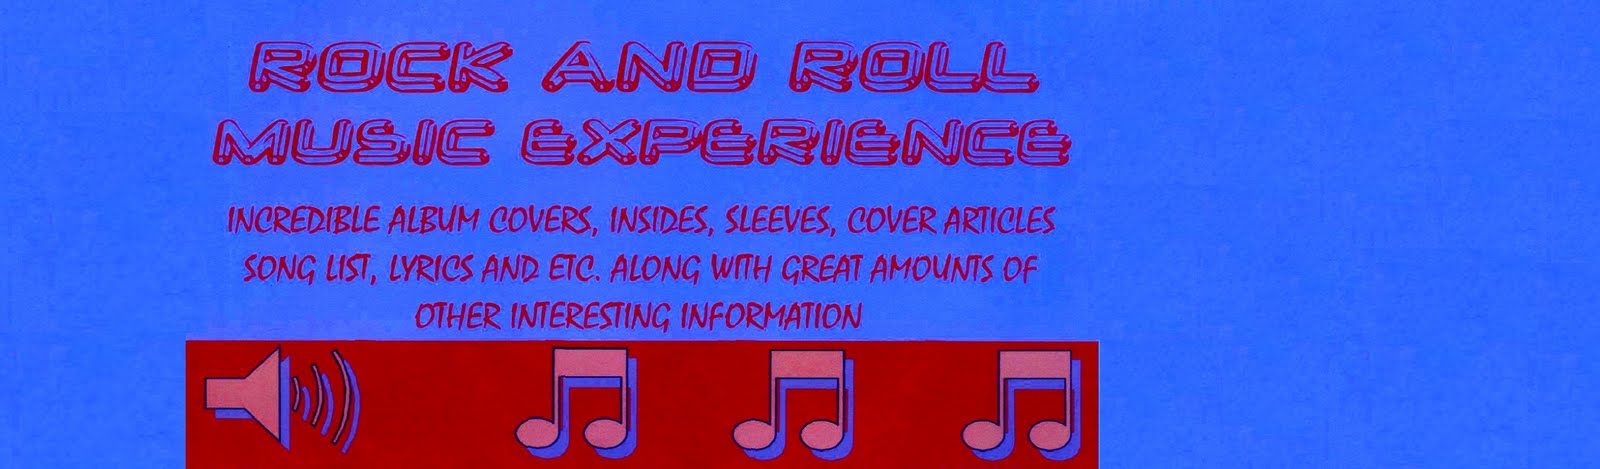 ROCK   AND   ROLL   MUSIC   EXPERIENCE